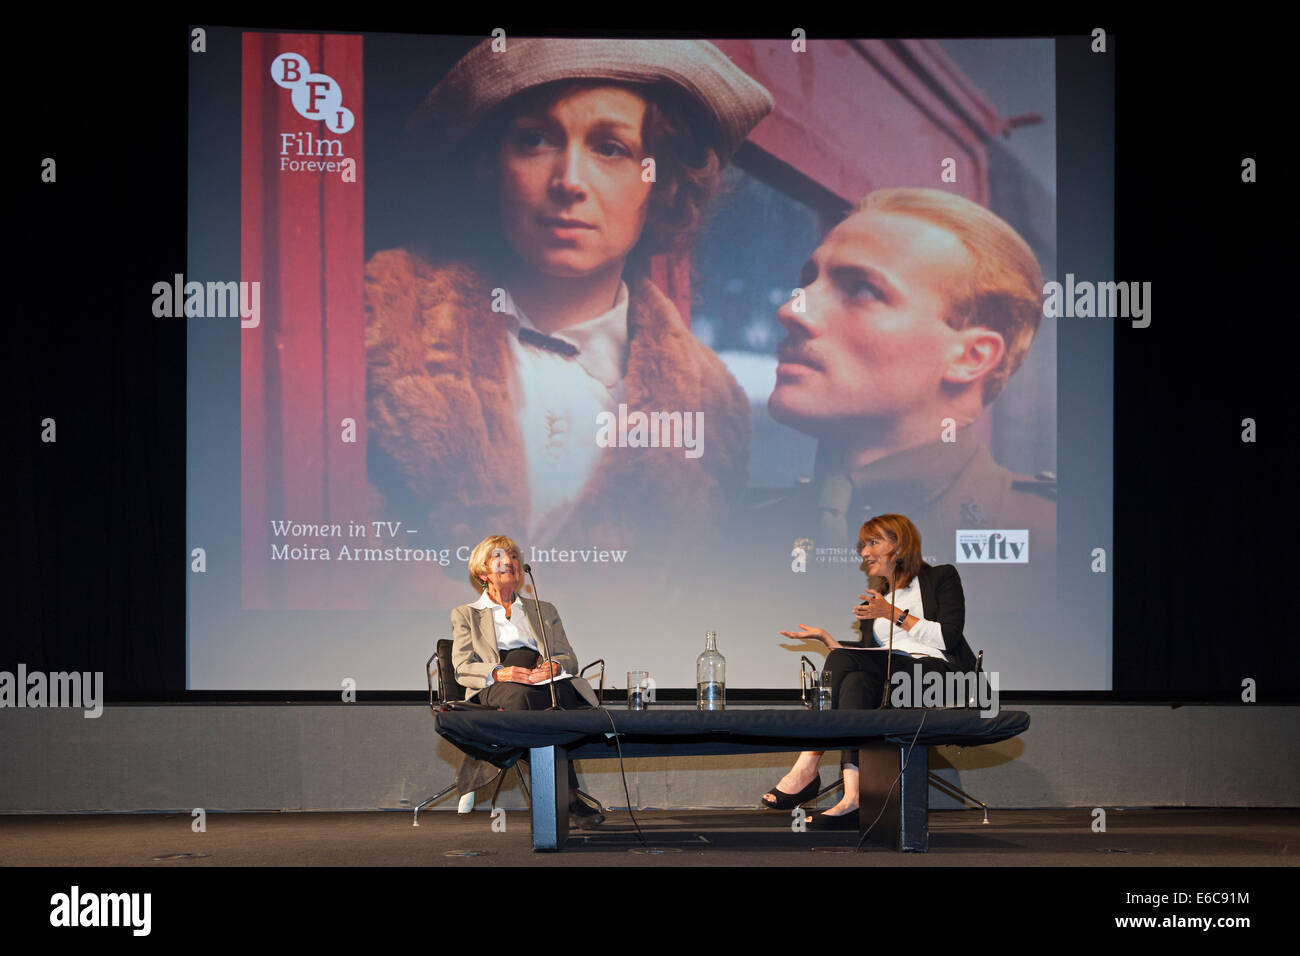 London, England, UK, 19 August 2014. Legendary BAFTA-Award winning multi-camera television drama director Moira Armstrong (L) being interviewed by Francine Stock (R) at an event in Miss Armstrong's honour organised by the British Film Institute (BFI) in association with BAFTA and Women in Film & Television (WFTV). The background slide is a still from Moira Armstrong’s 1979 BBC production ‘Testament of Youth’, an adaptation of Vera Brittain’s classic memoir about the impact of World War I. Credit:  John Henshall / Alamy Live News PER0422 Stock Photo